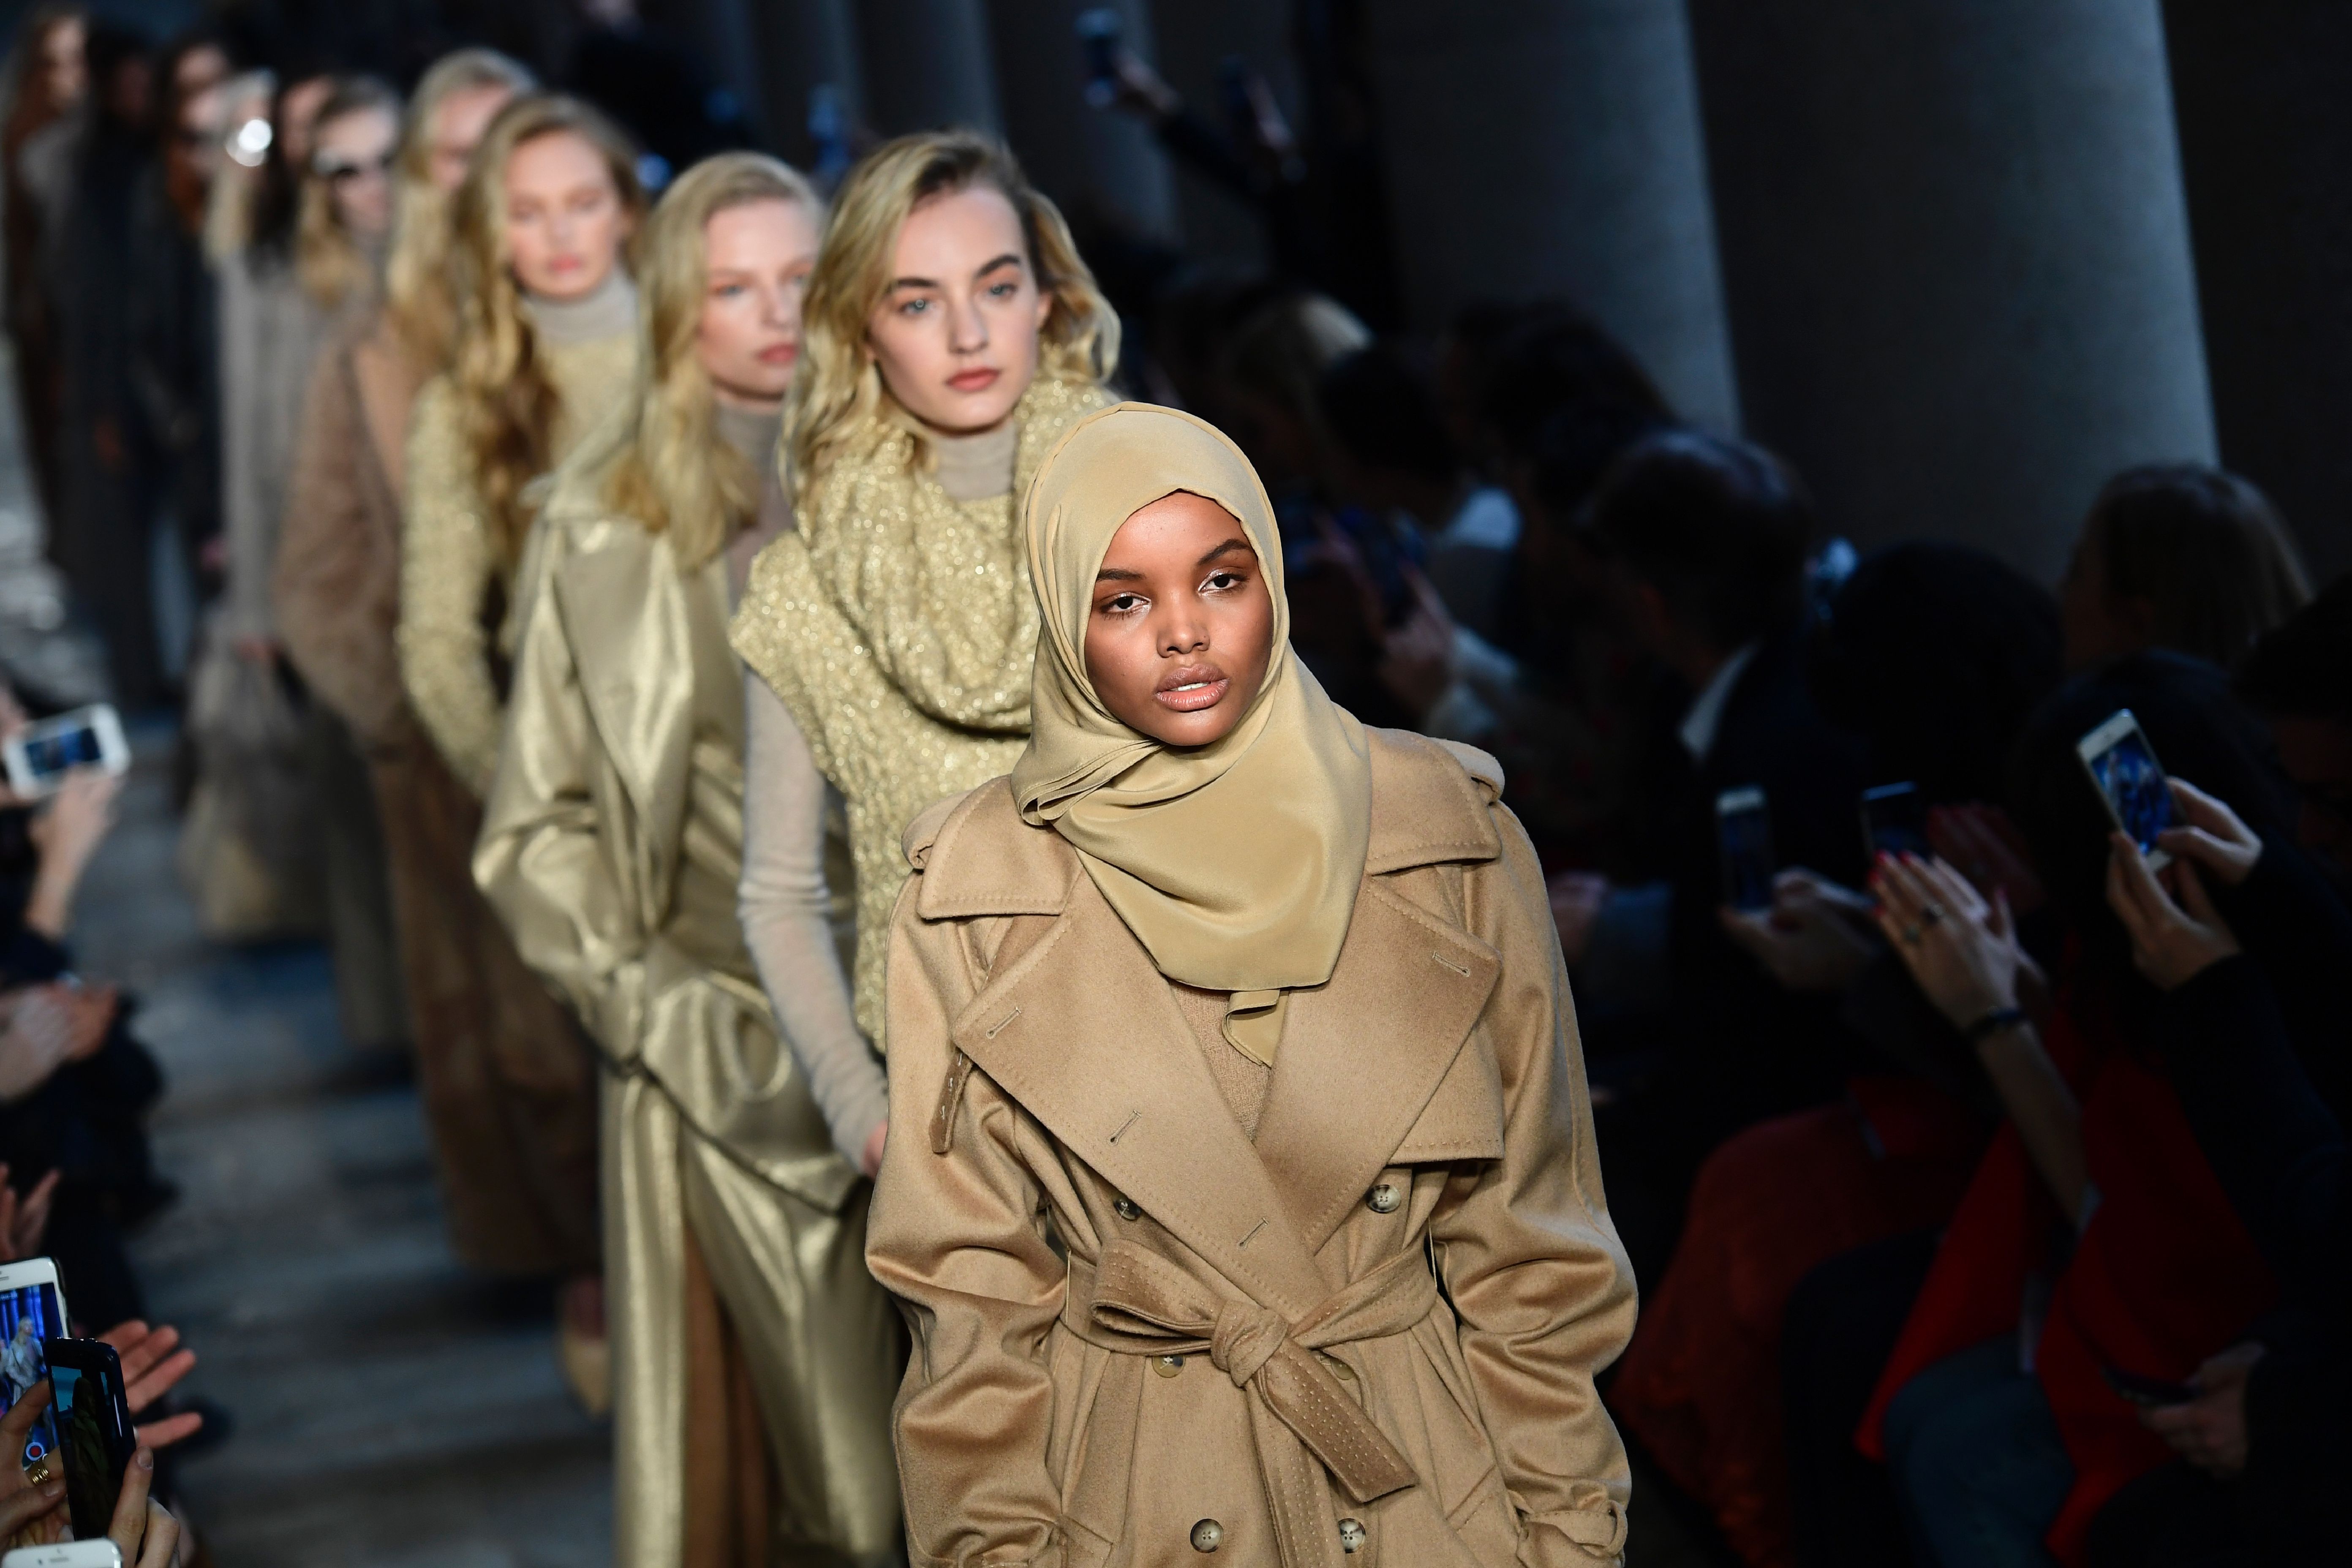 Hijab Wearing Model Halima Aden Opens Up About The Importance Of